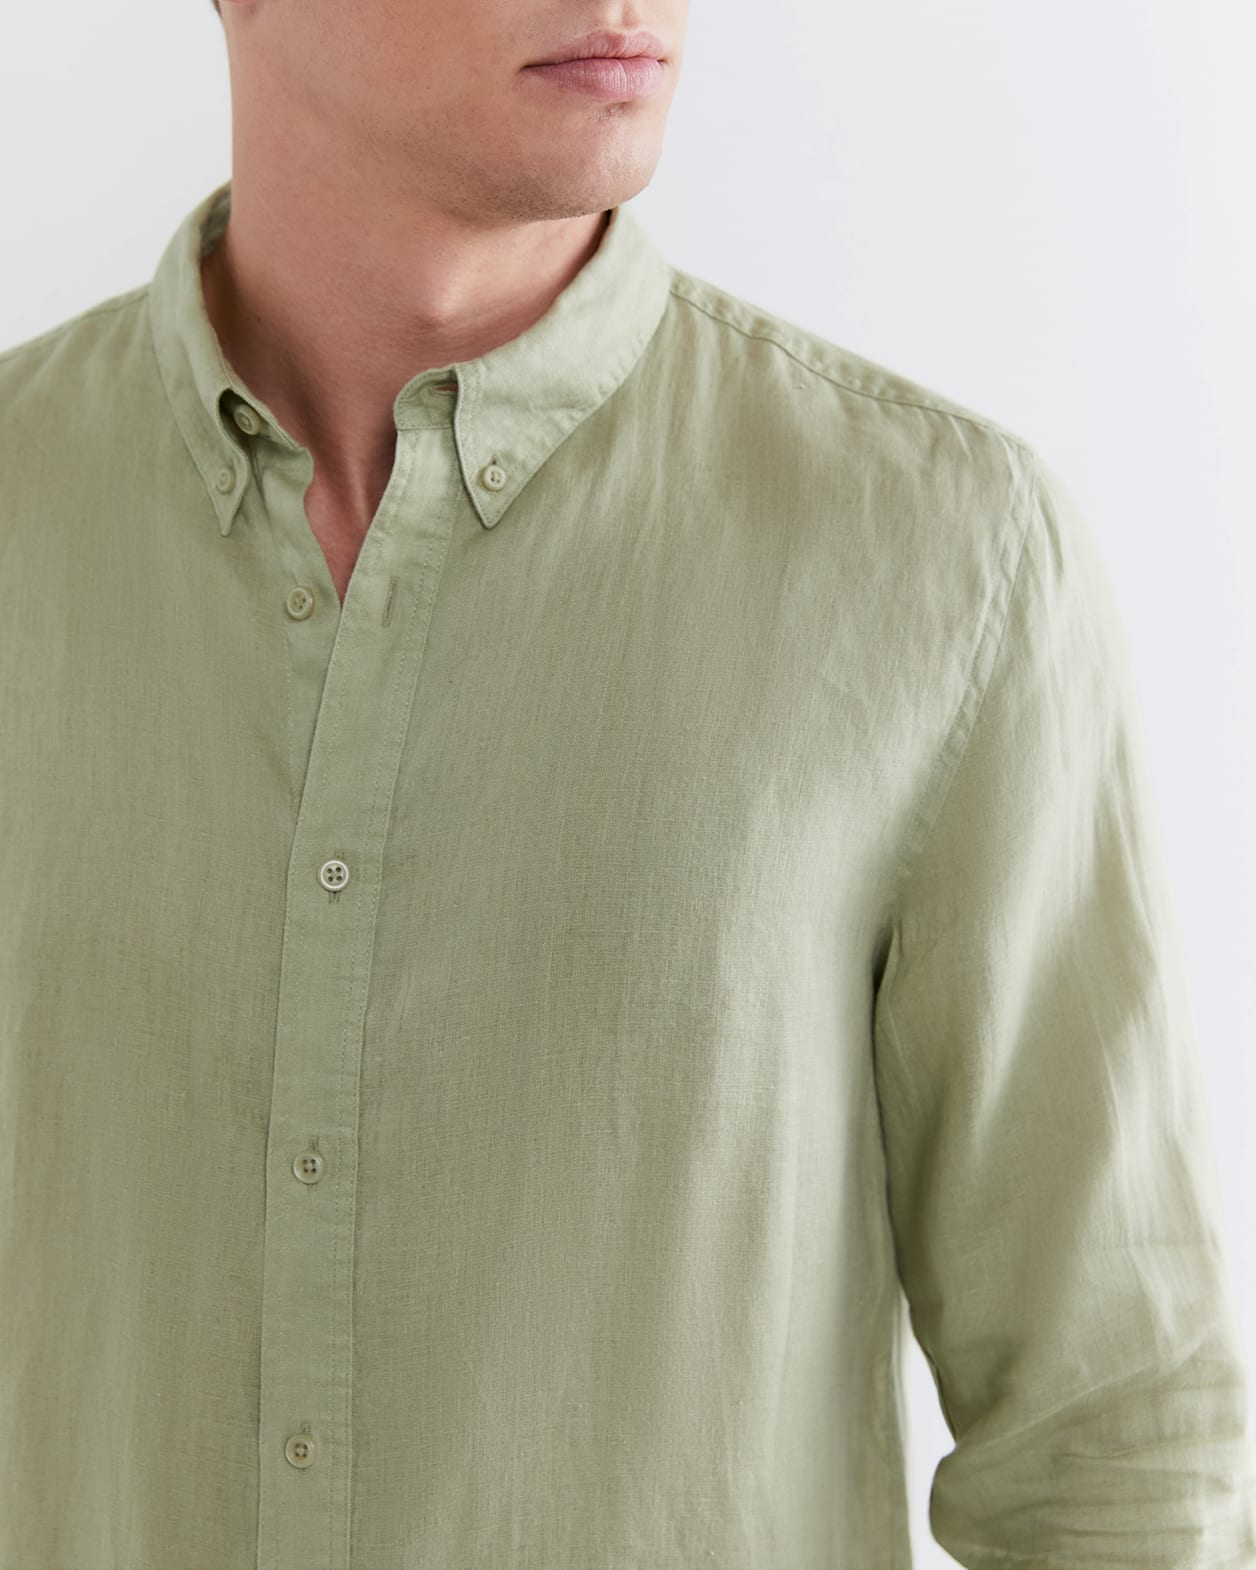 Hux Linen Shirt in OLIVE